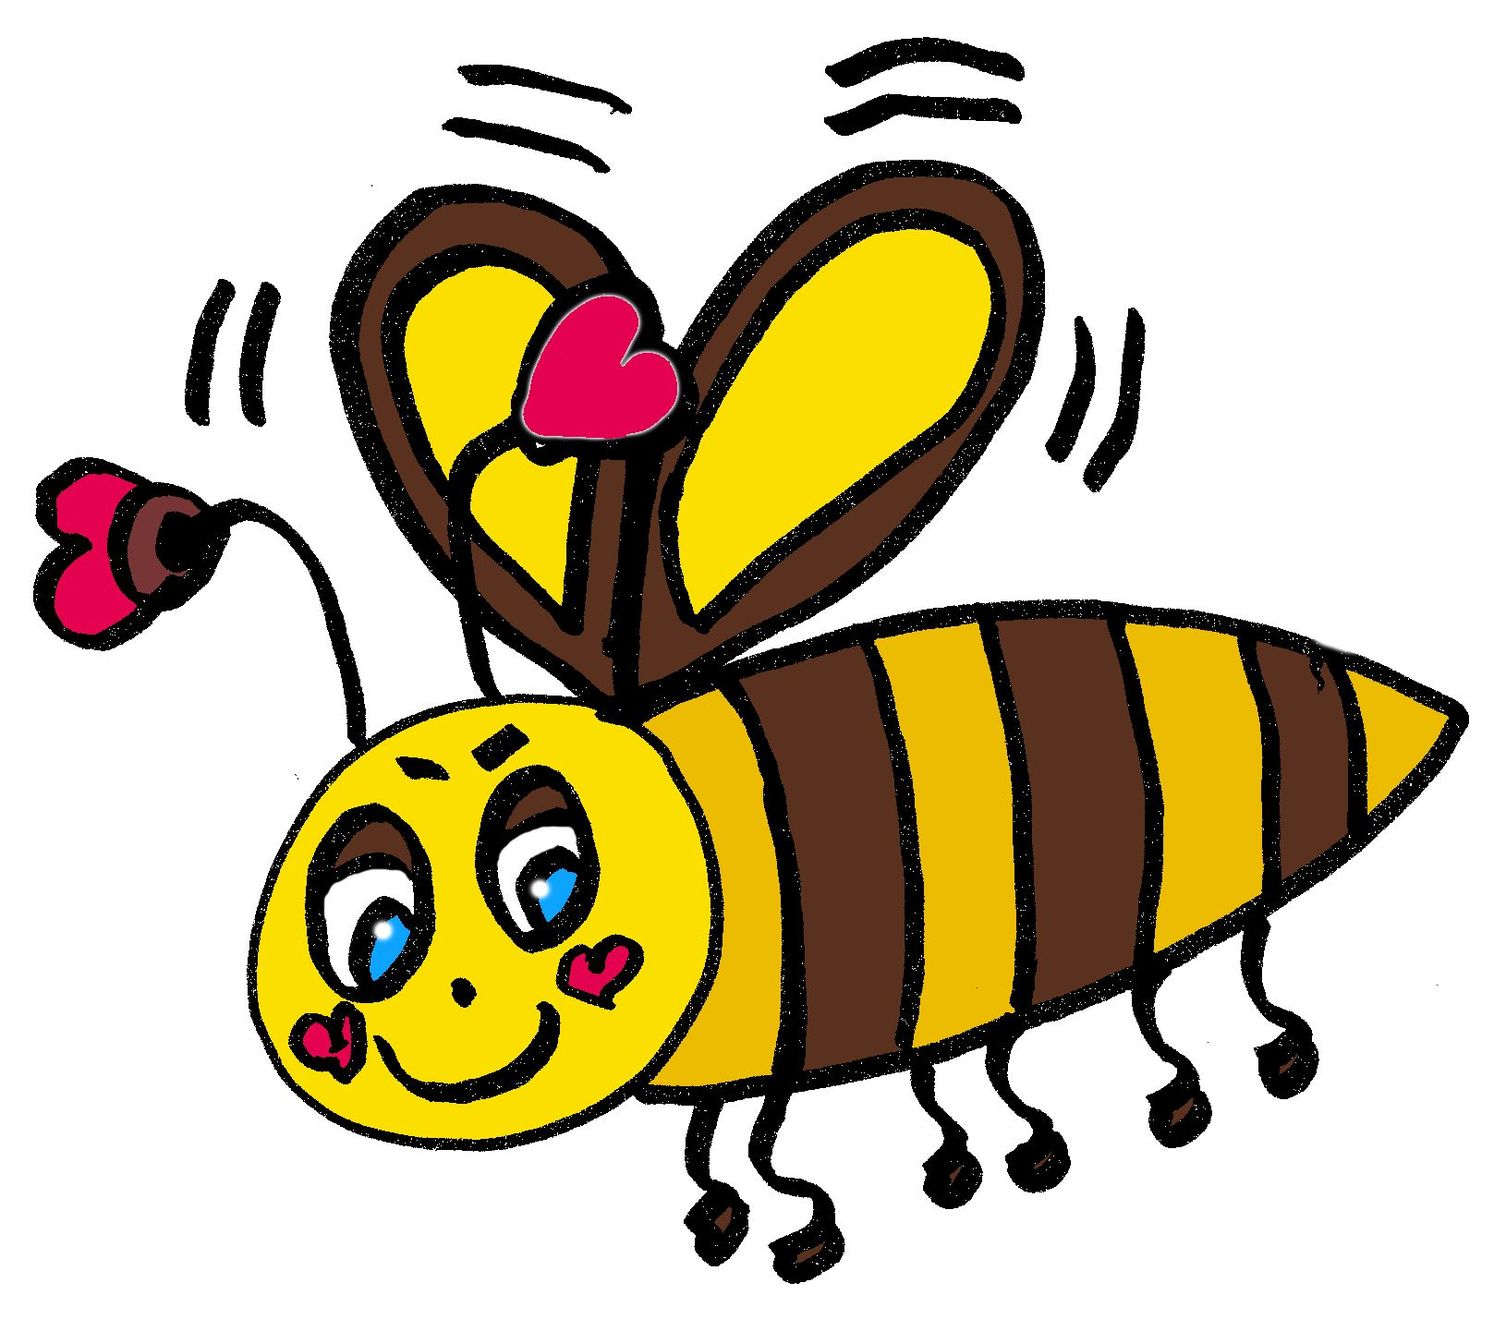 Cartoon Bees Images - ClipArt Best